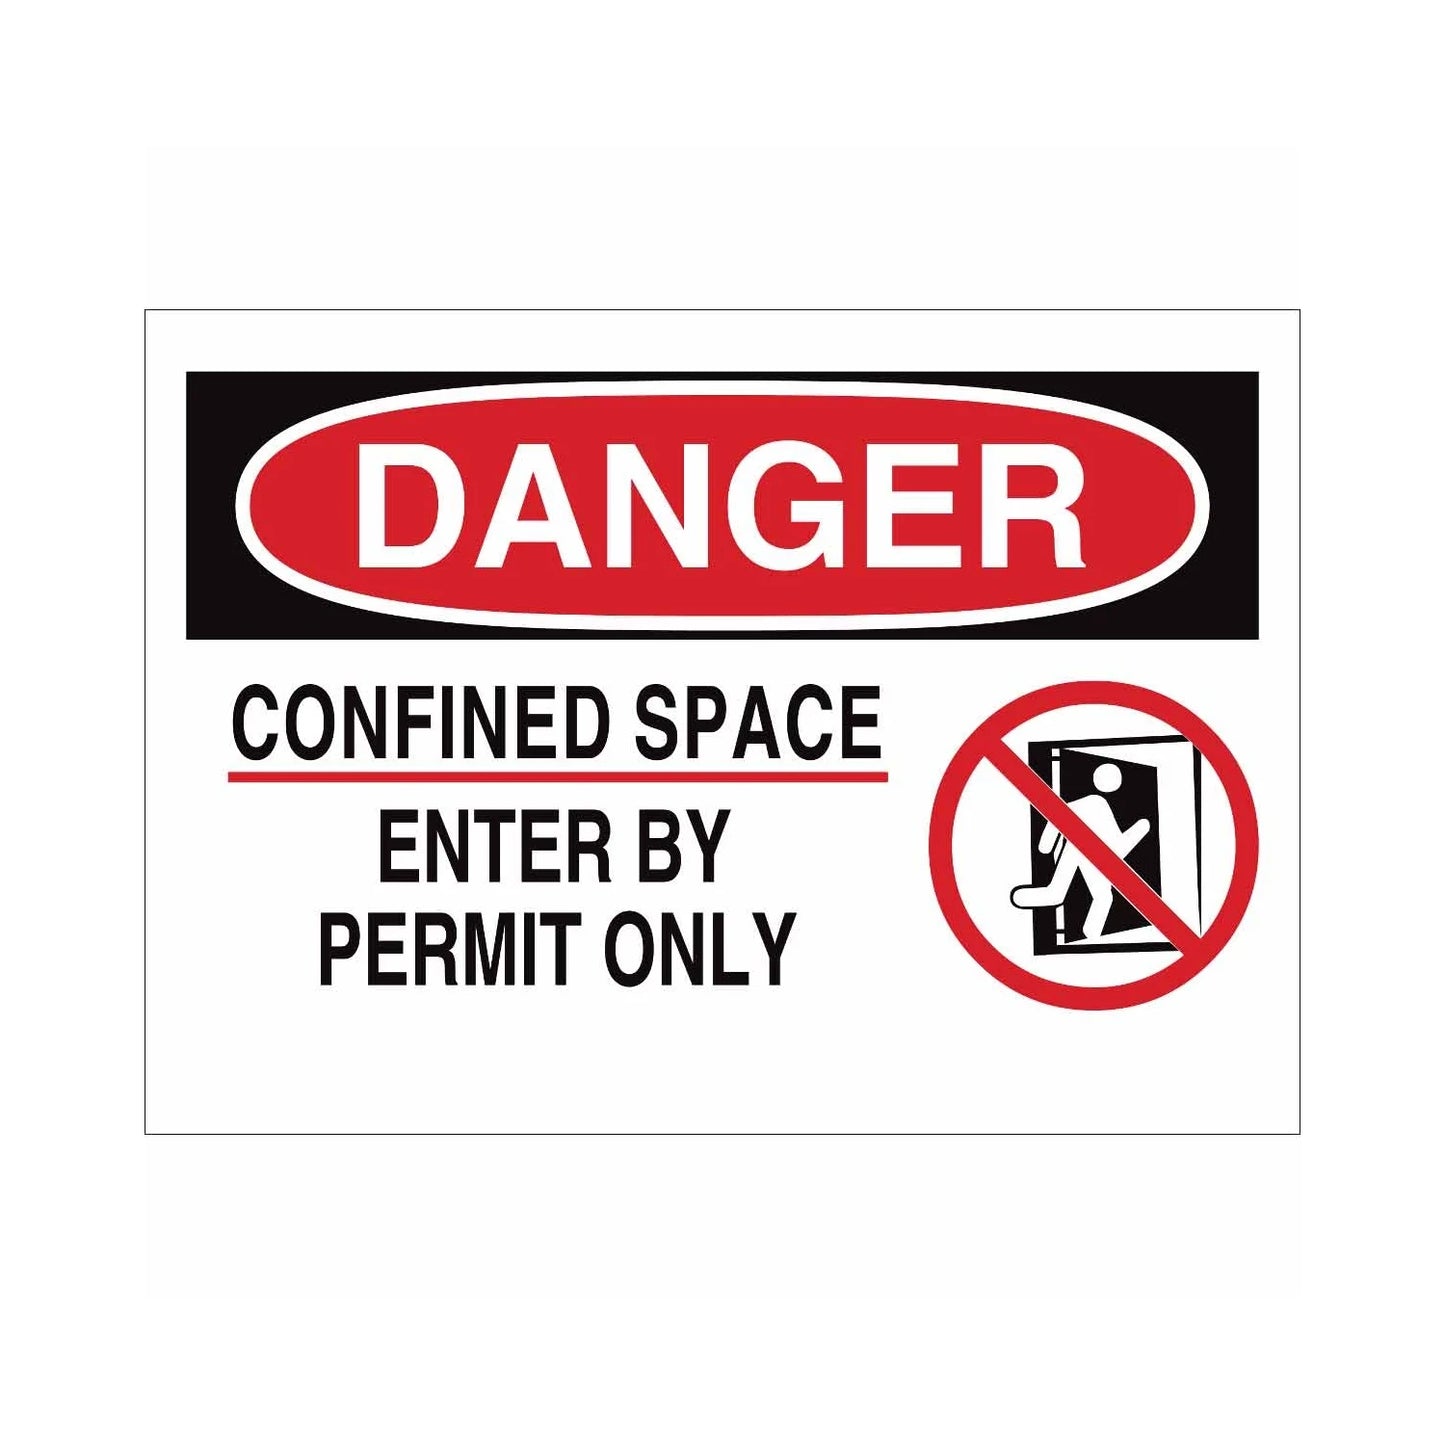 DANGER Confined Space Enter By Permit Only 02